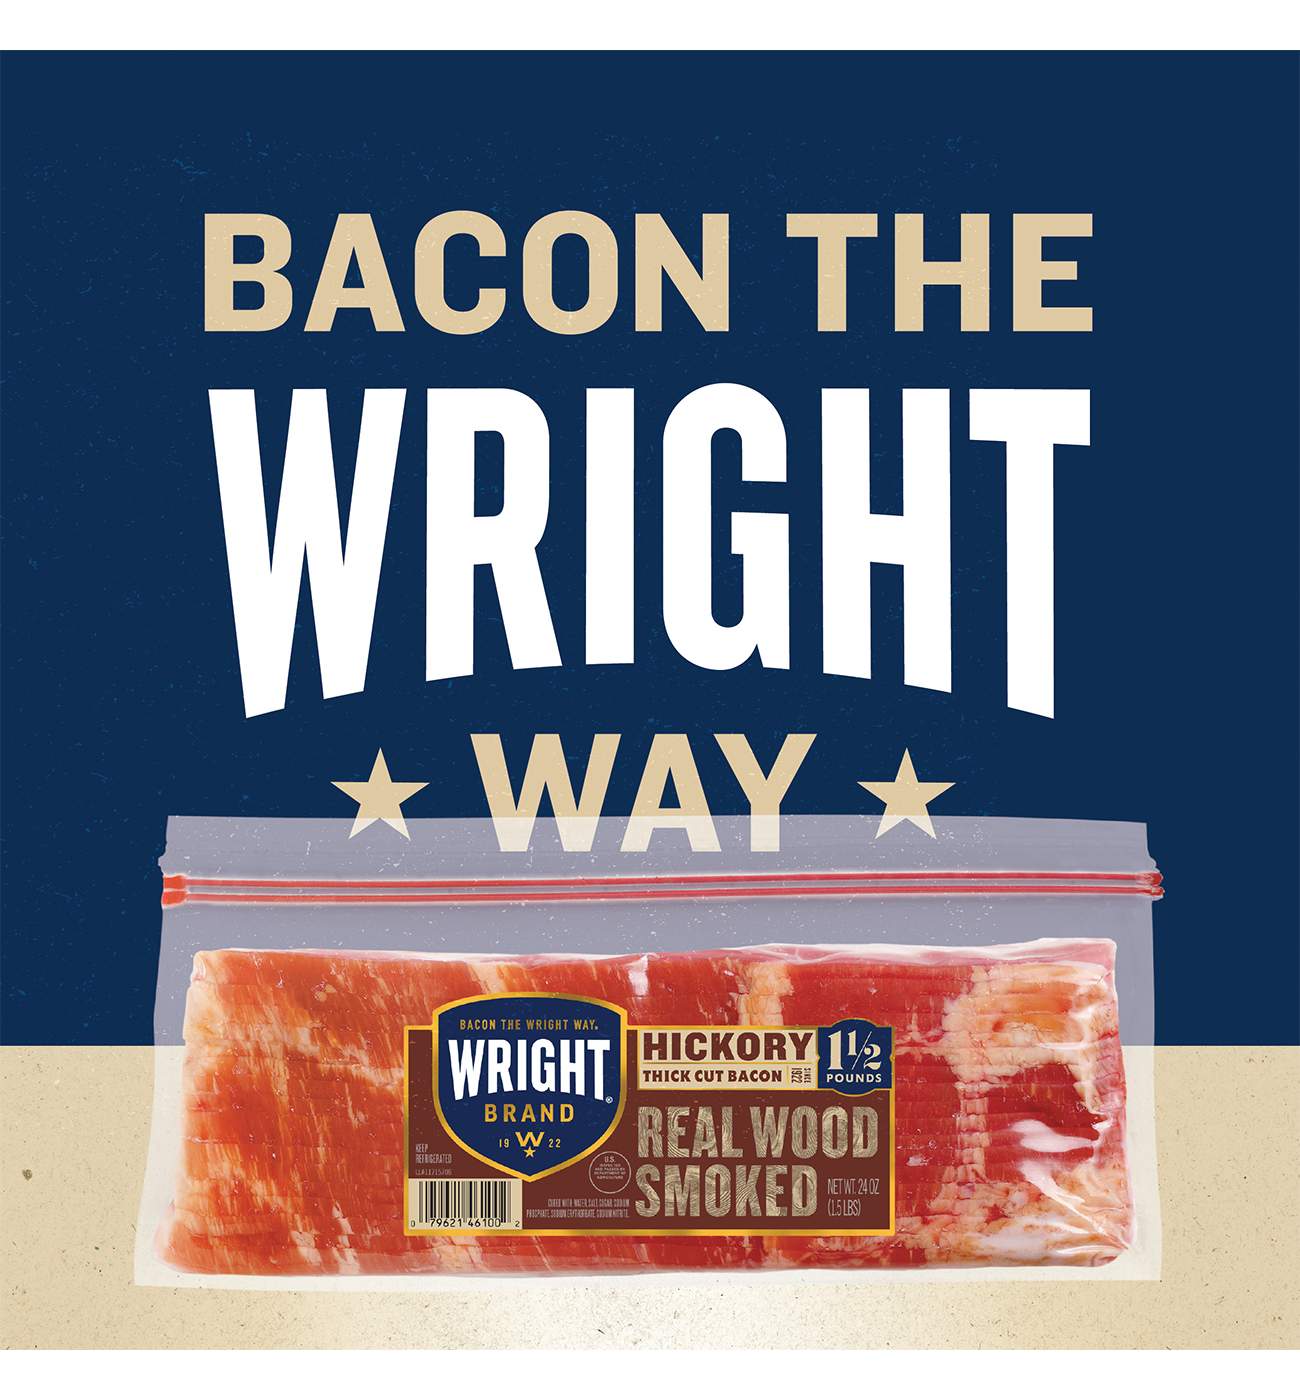 Wright Brand Hickory Smoked Thick Cut Bacon; image 6 of 6